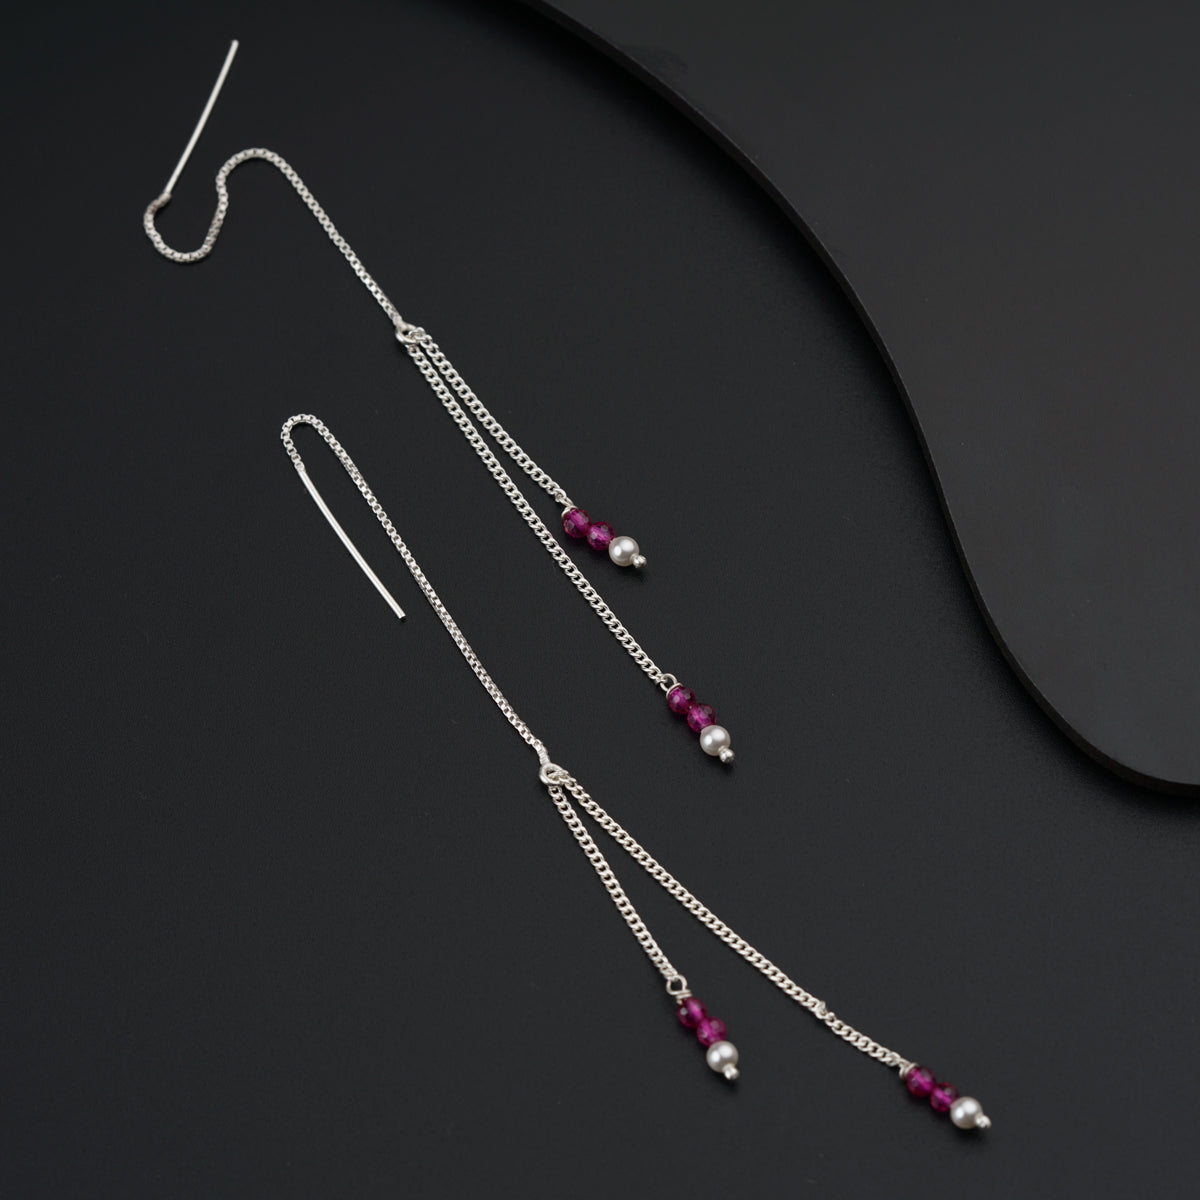 a pair of long silver chain earrings with red beads